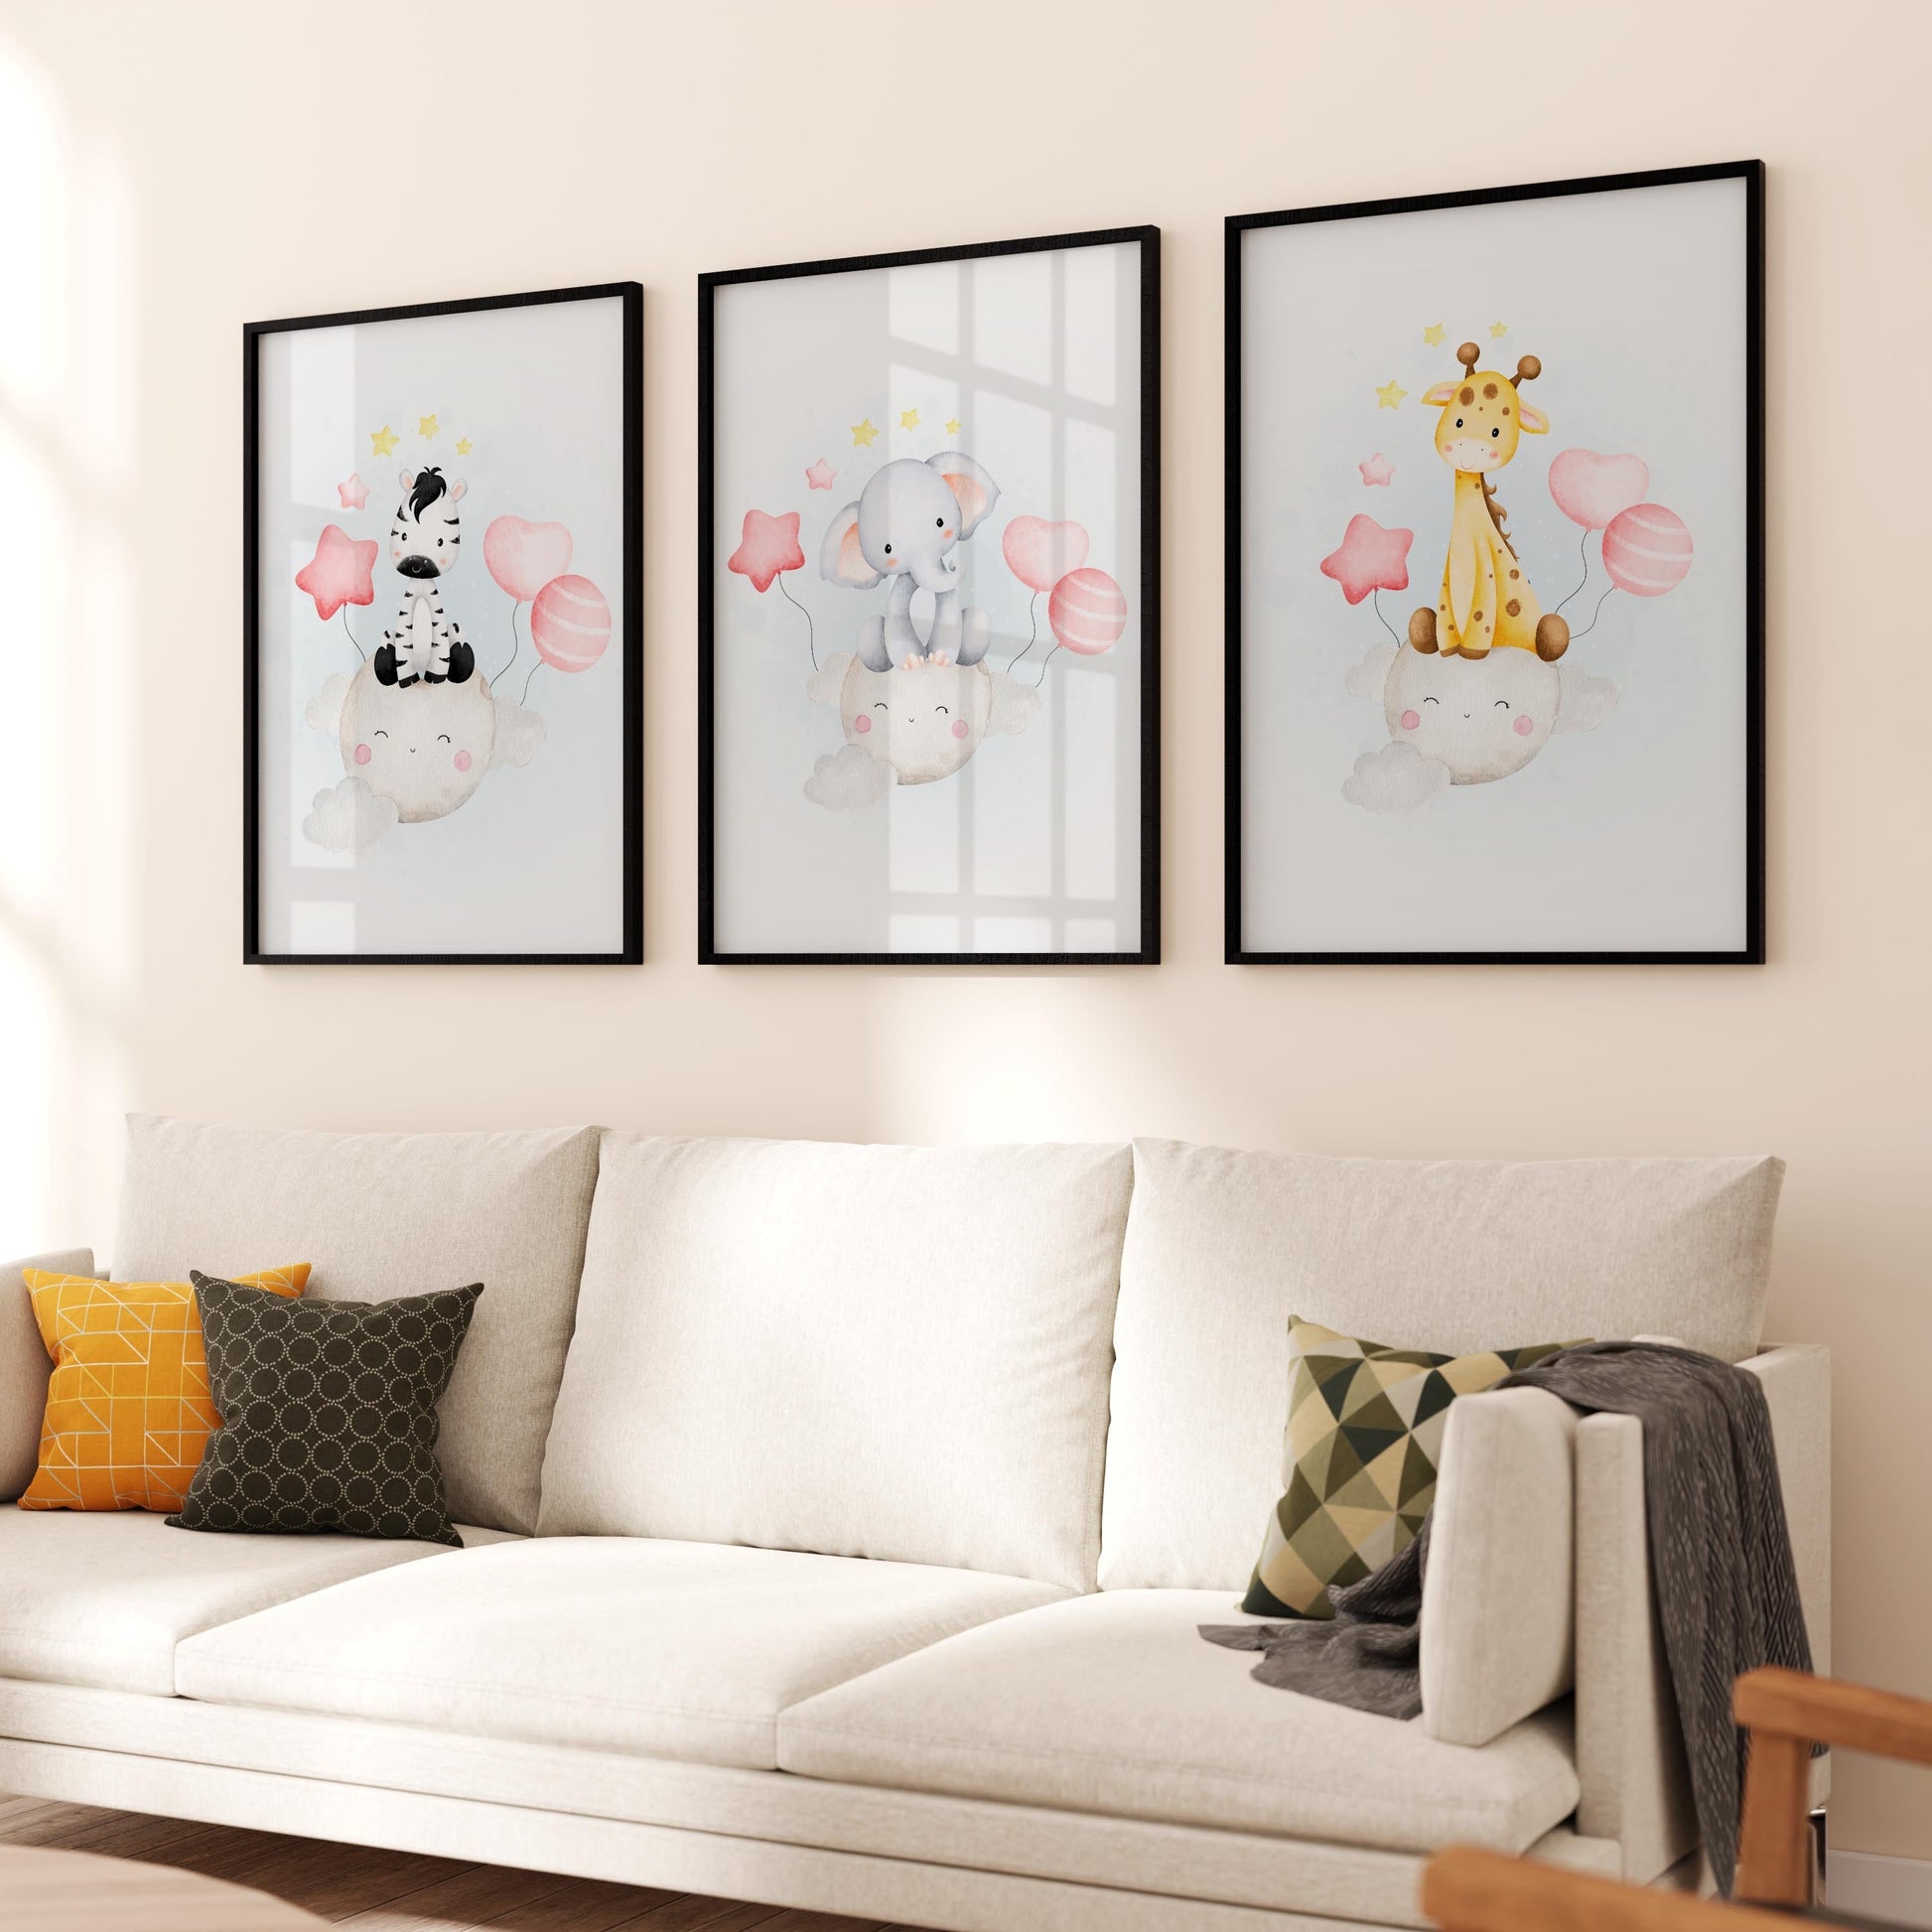 Three framed canvas prints: Personalized animal decor for baby shower.